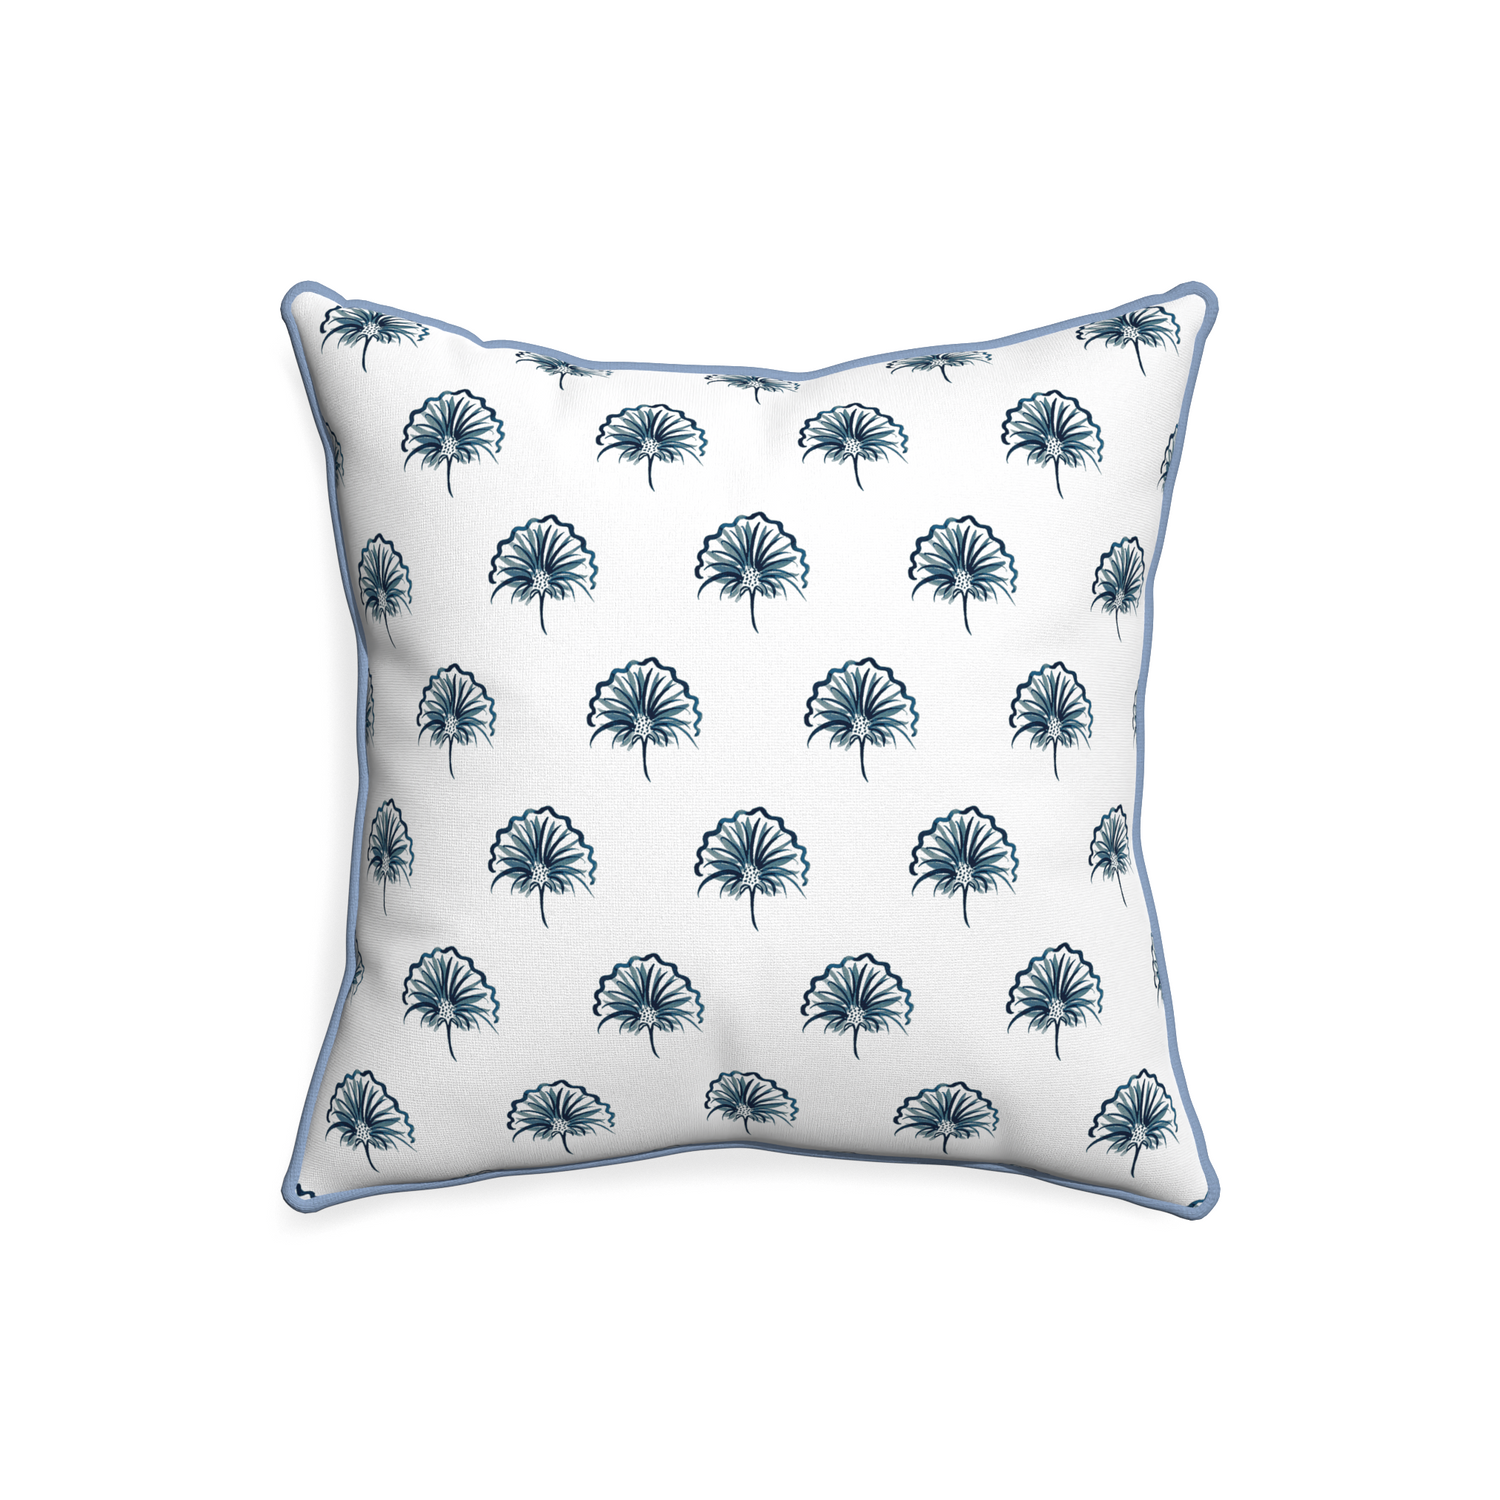 20-square penelope midnight custom pillow with sky piping on white background